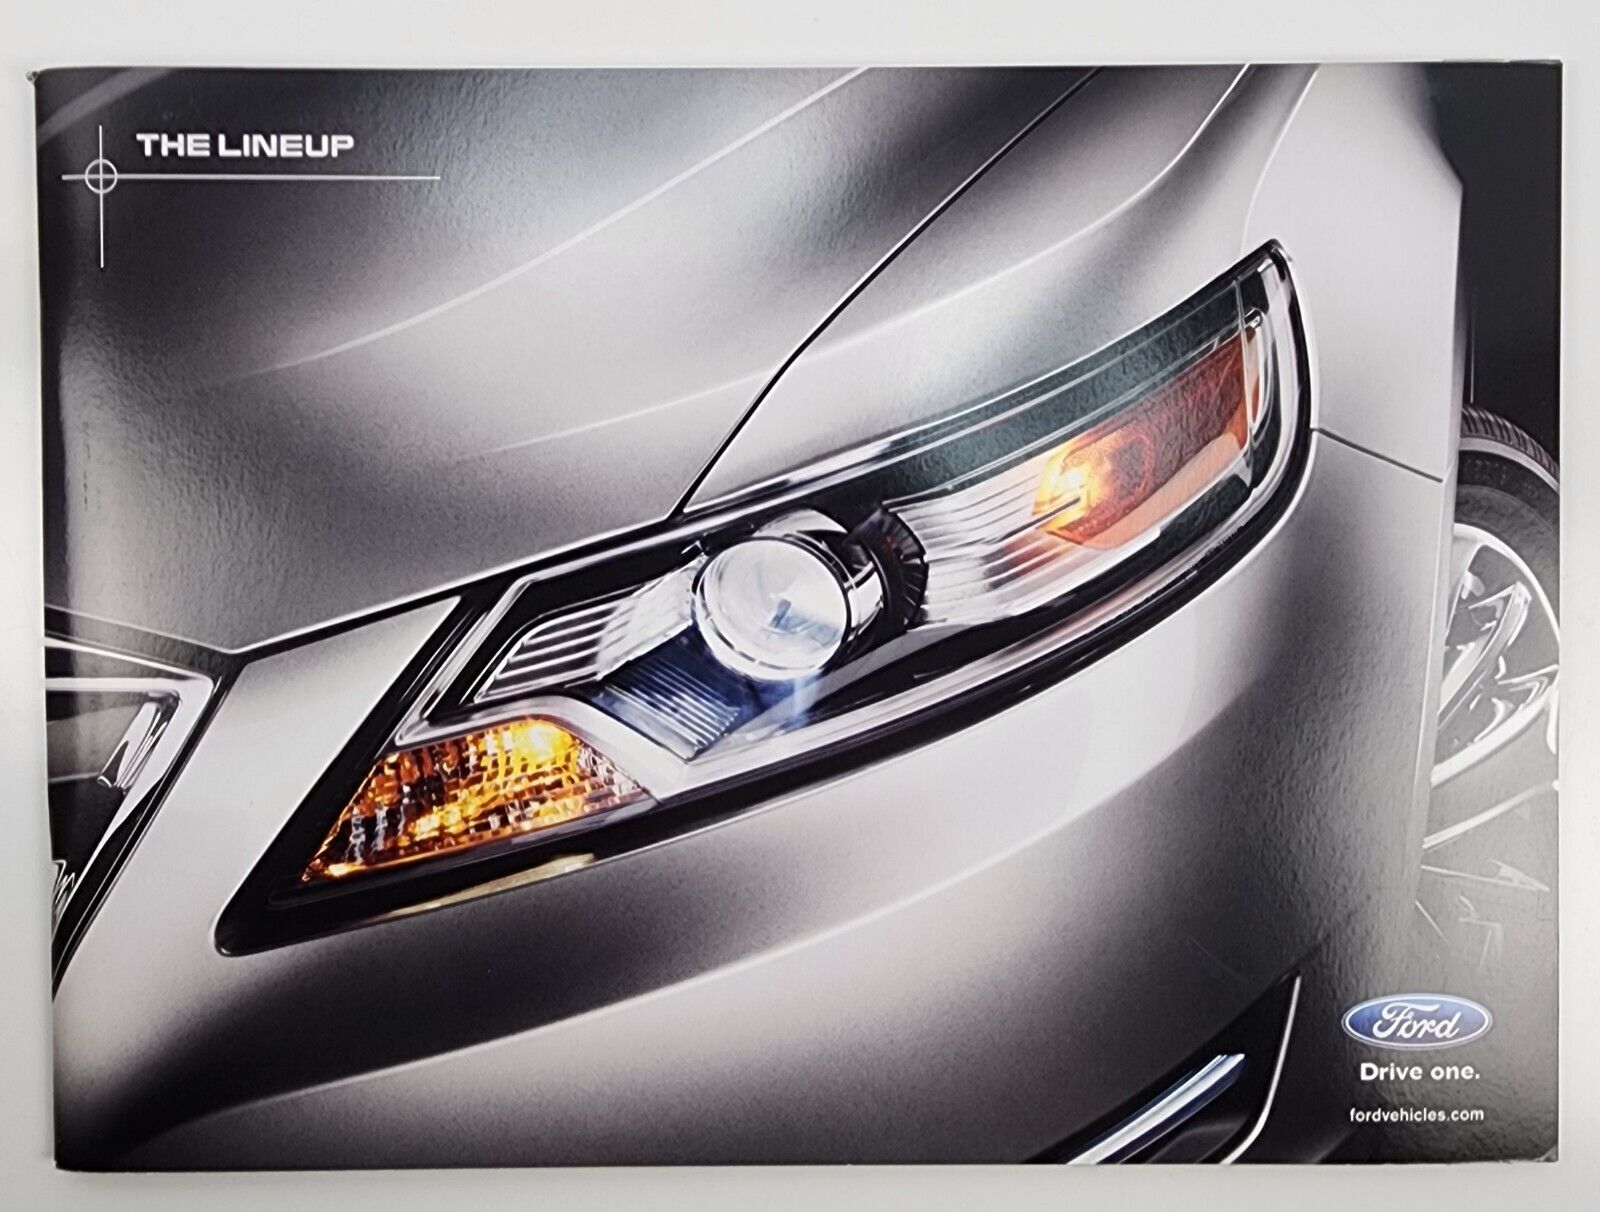 2010 Ford The Full Line Up Lineup Brochure Sales Advertising Mustang F-150 